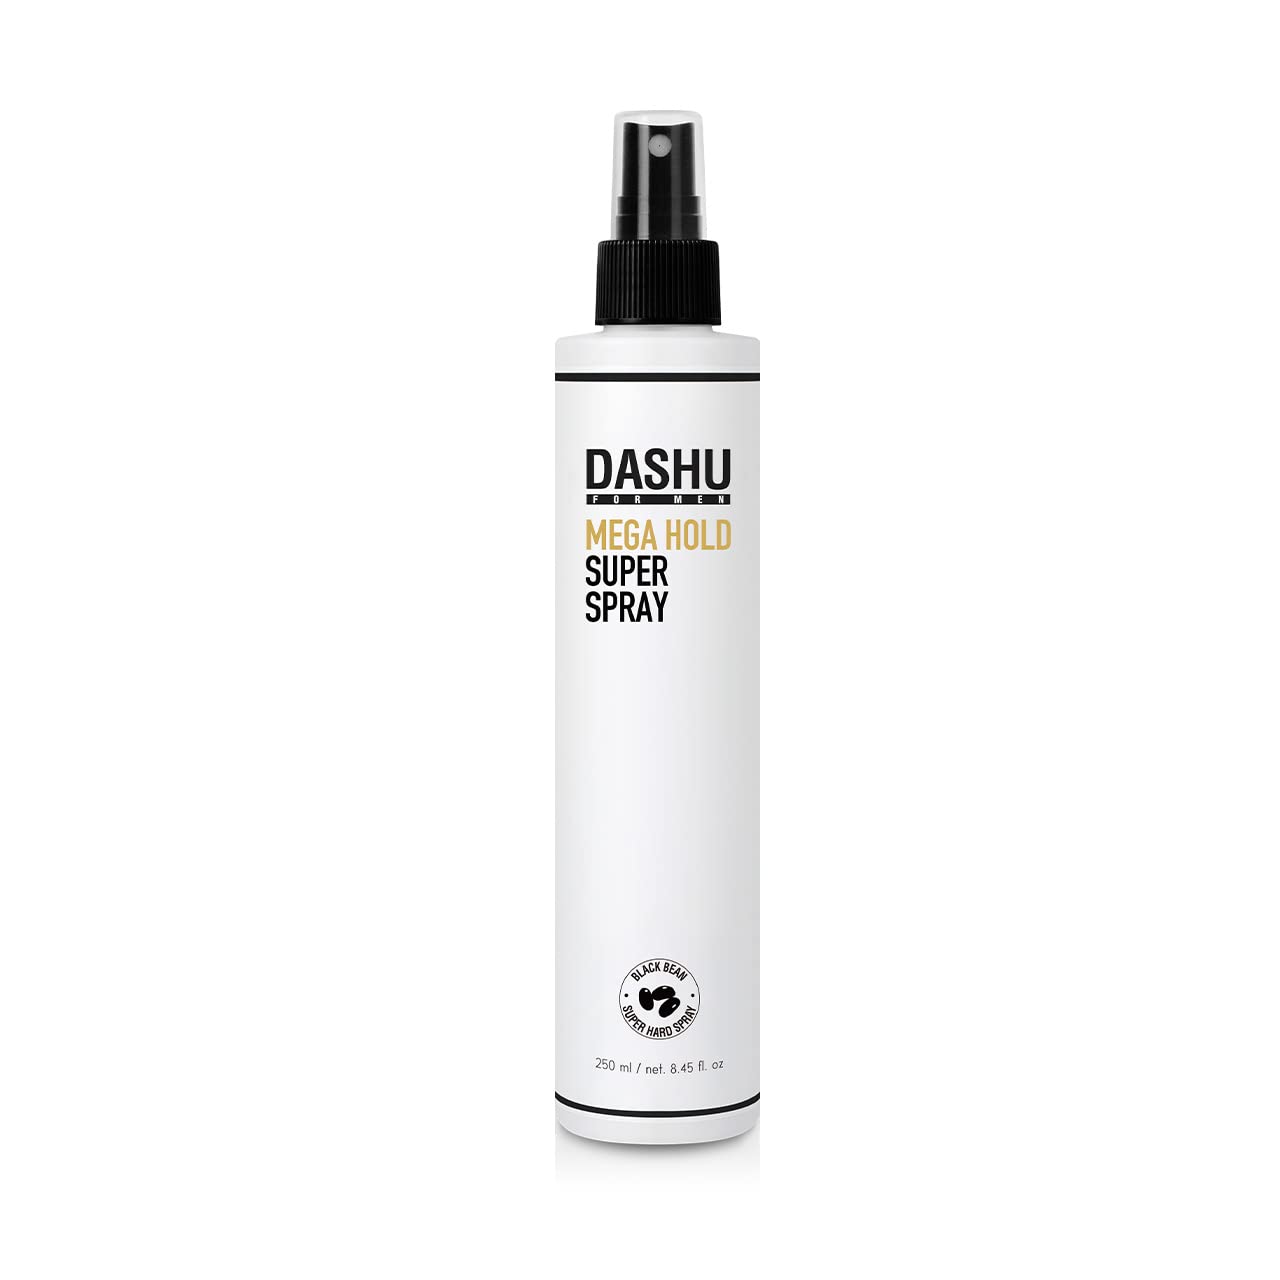 DASHU Premium Mega Hold Super Spray 8.45fl oz – Extra Strong Hold, Dryness Prevention, All-Natural Ingredients